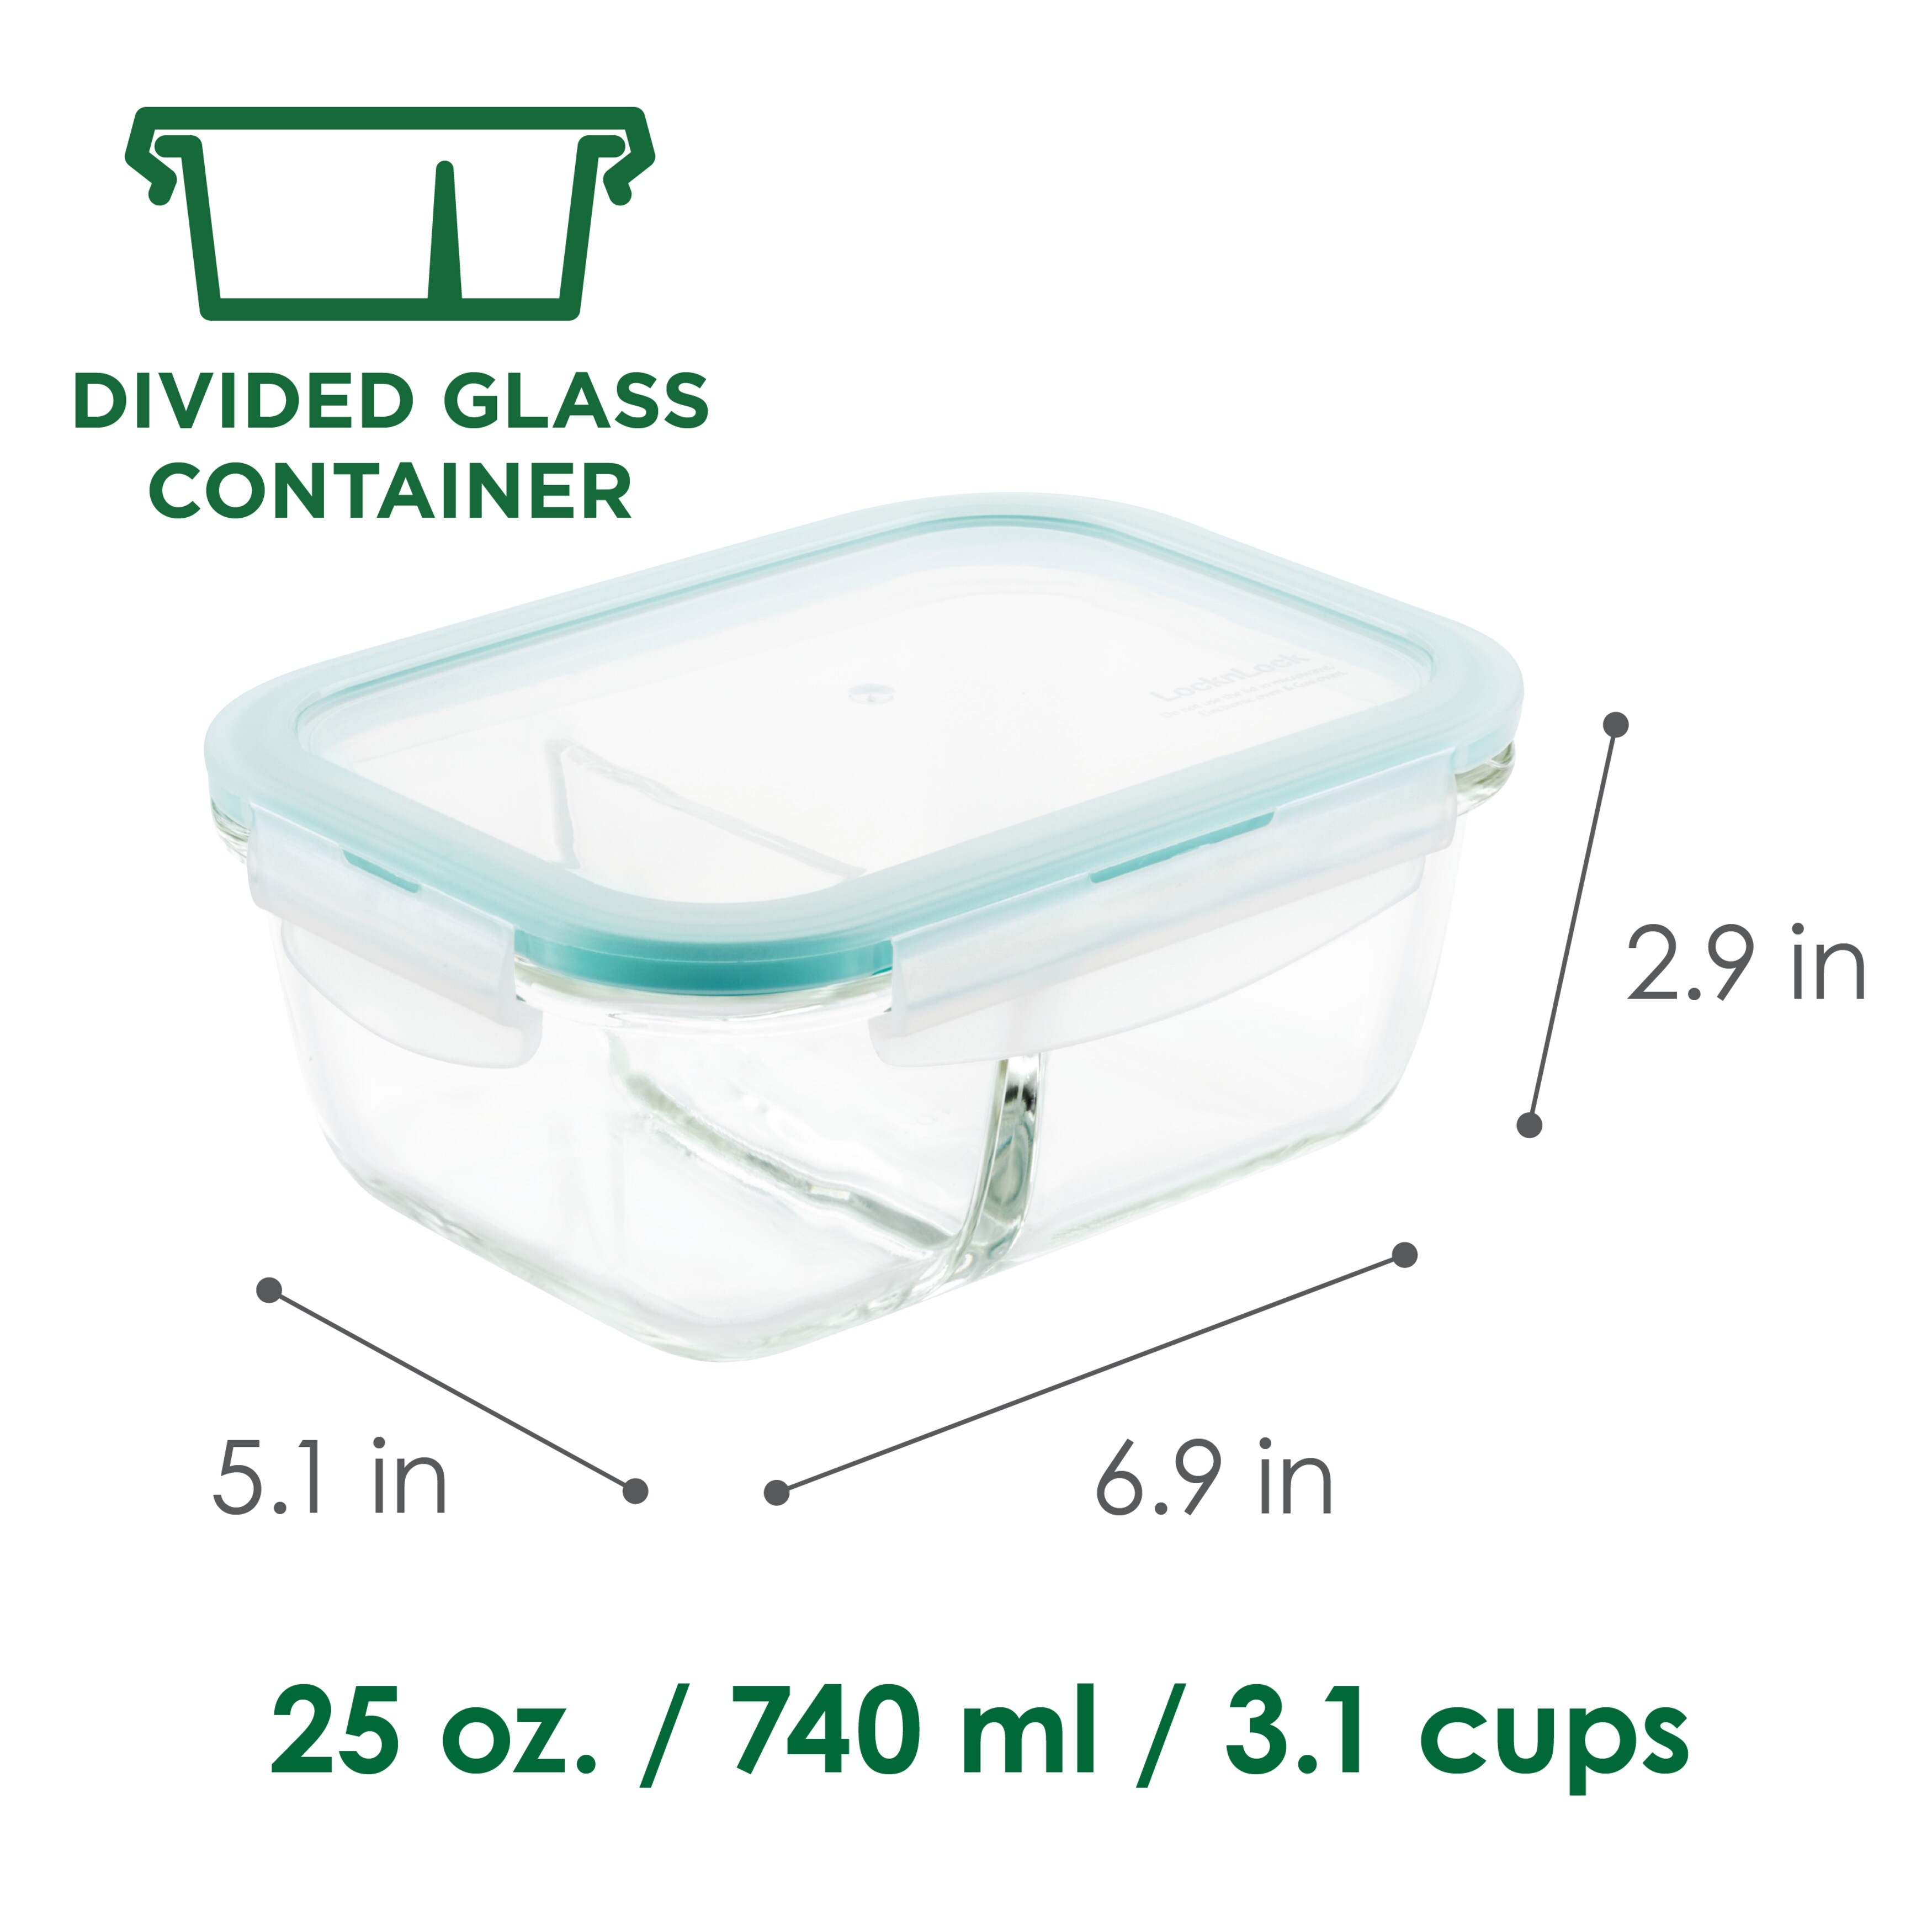 https://ak1.ostkcdn.com/images/products/is/images/direct/6dbeb6f332a7cde476b8b91a36a50d30e917c366/LocknLock-Purely-Better-Glass-Divided-Rectangular-Food-Storage-Containers%2C-25-Ounce%2C-Set-of-Three.jpg